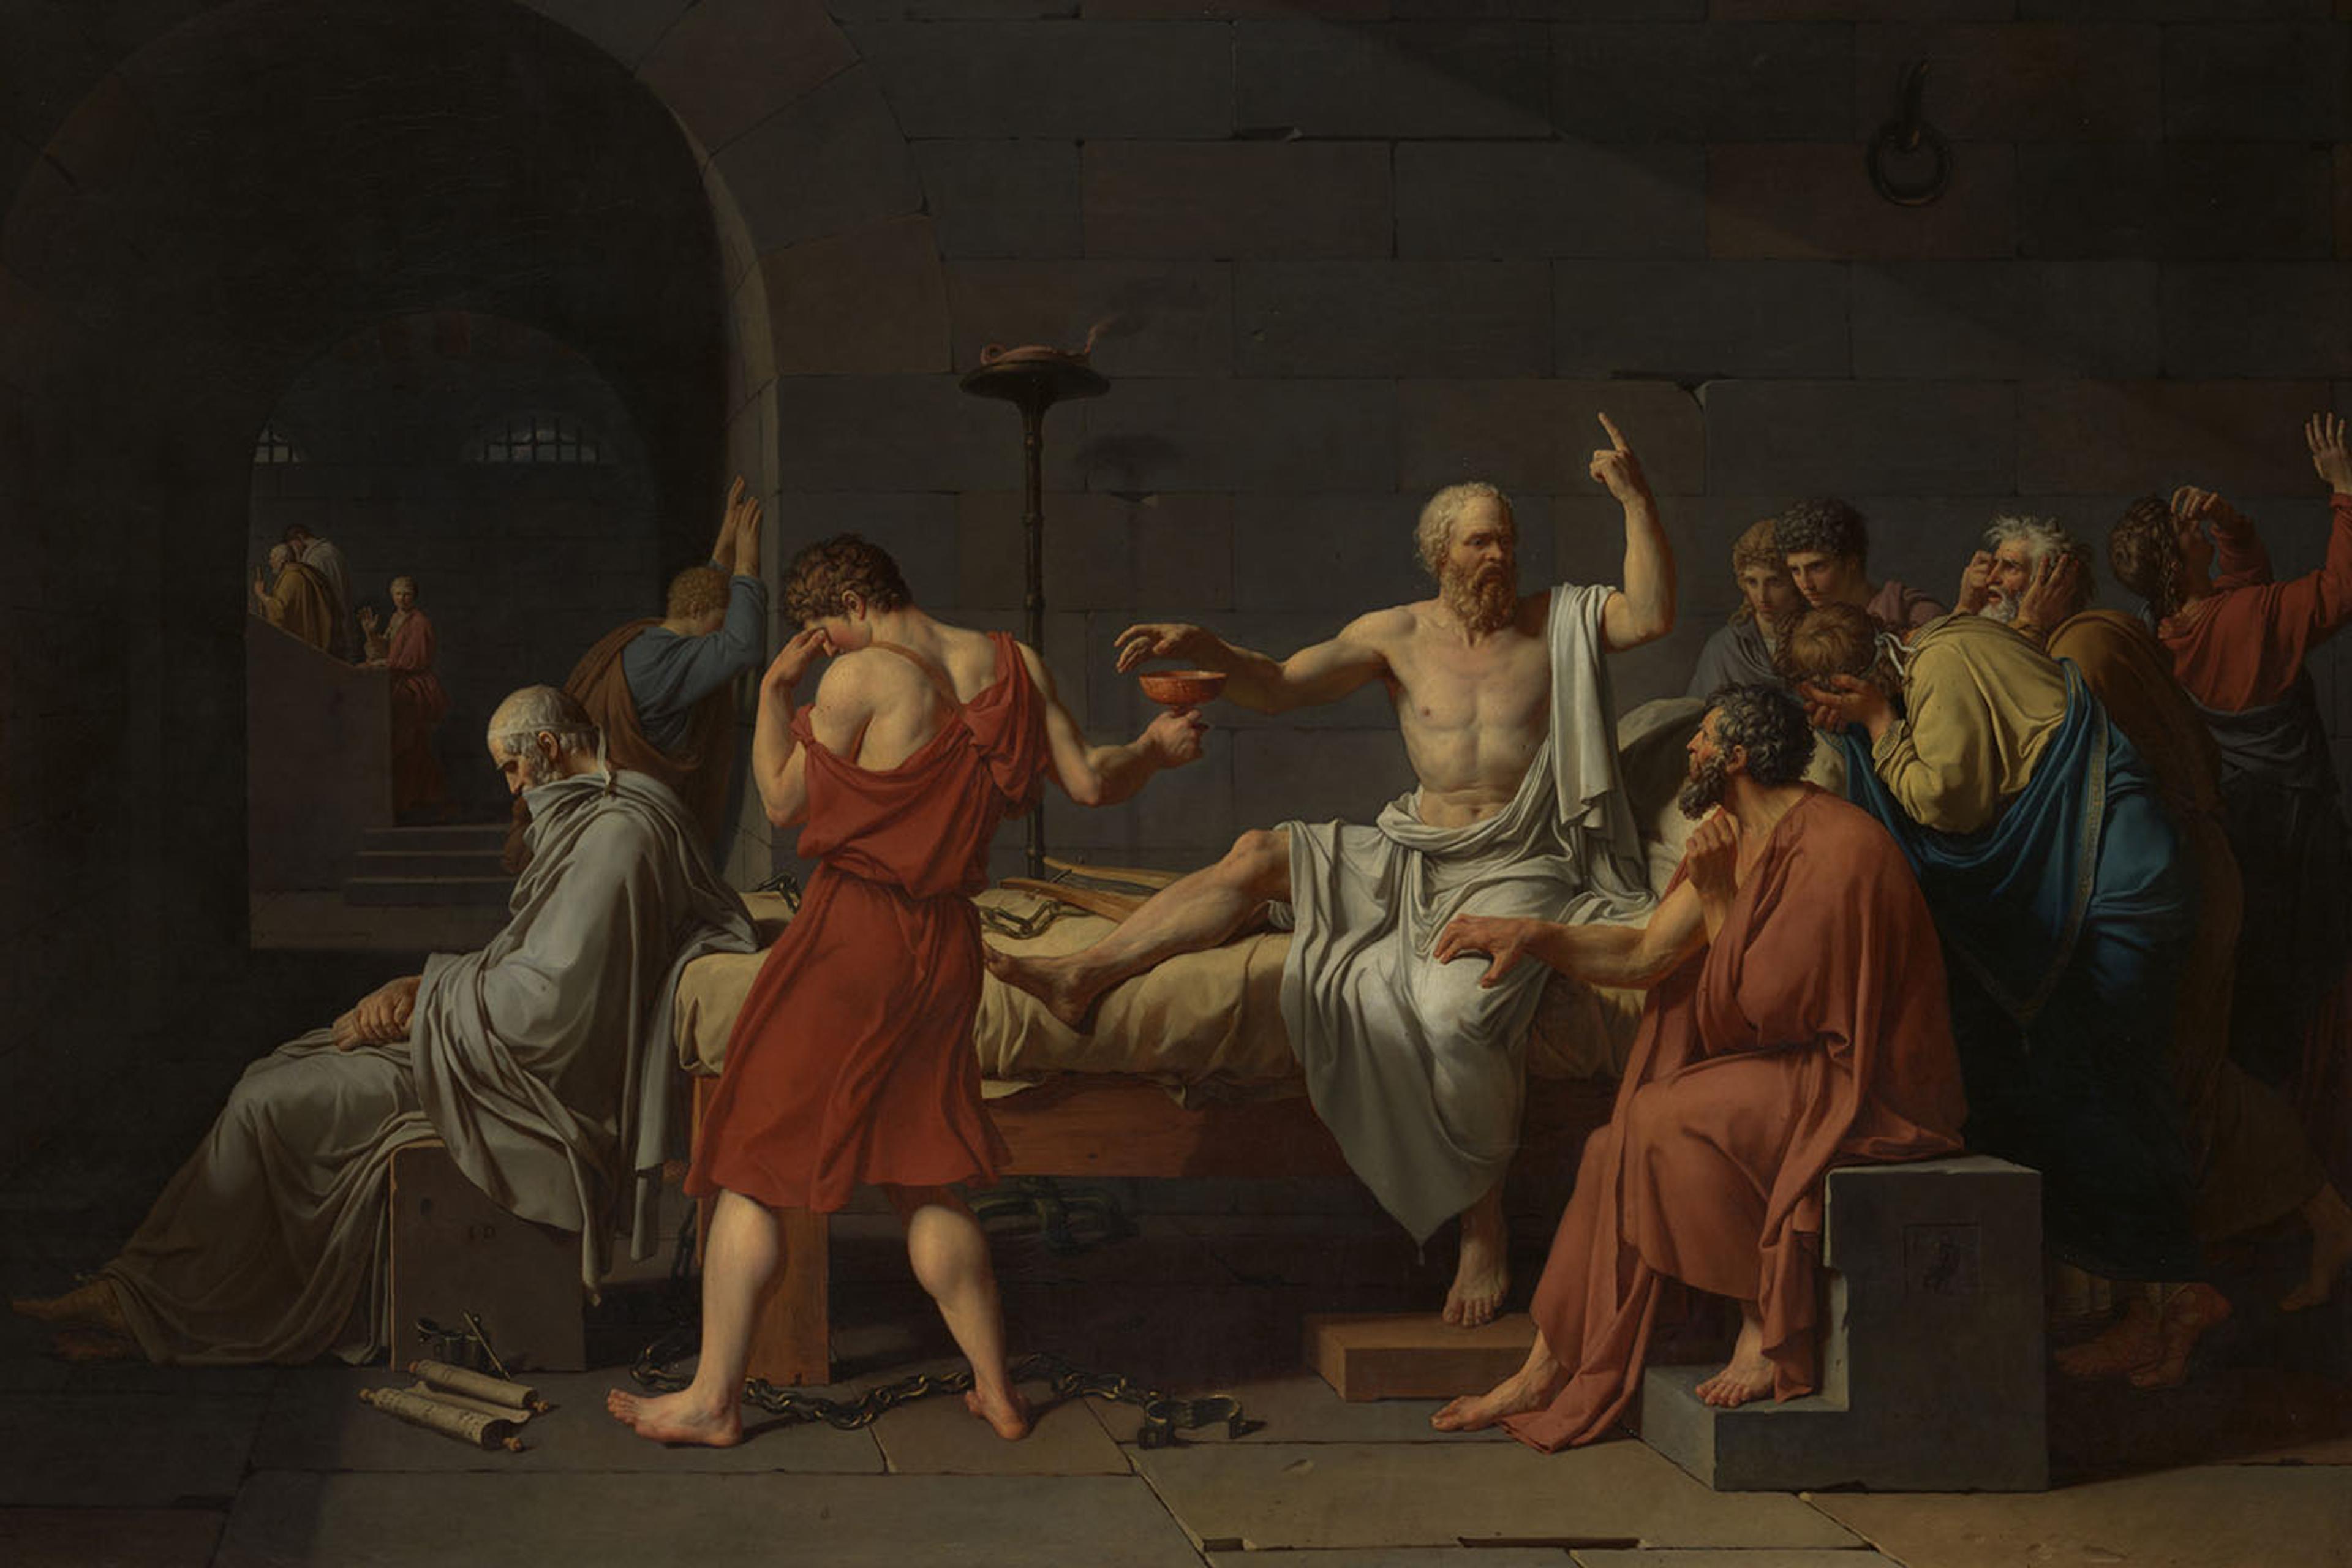 Jacques Louis David's painting "Death of Socrates"